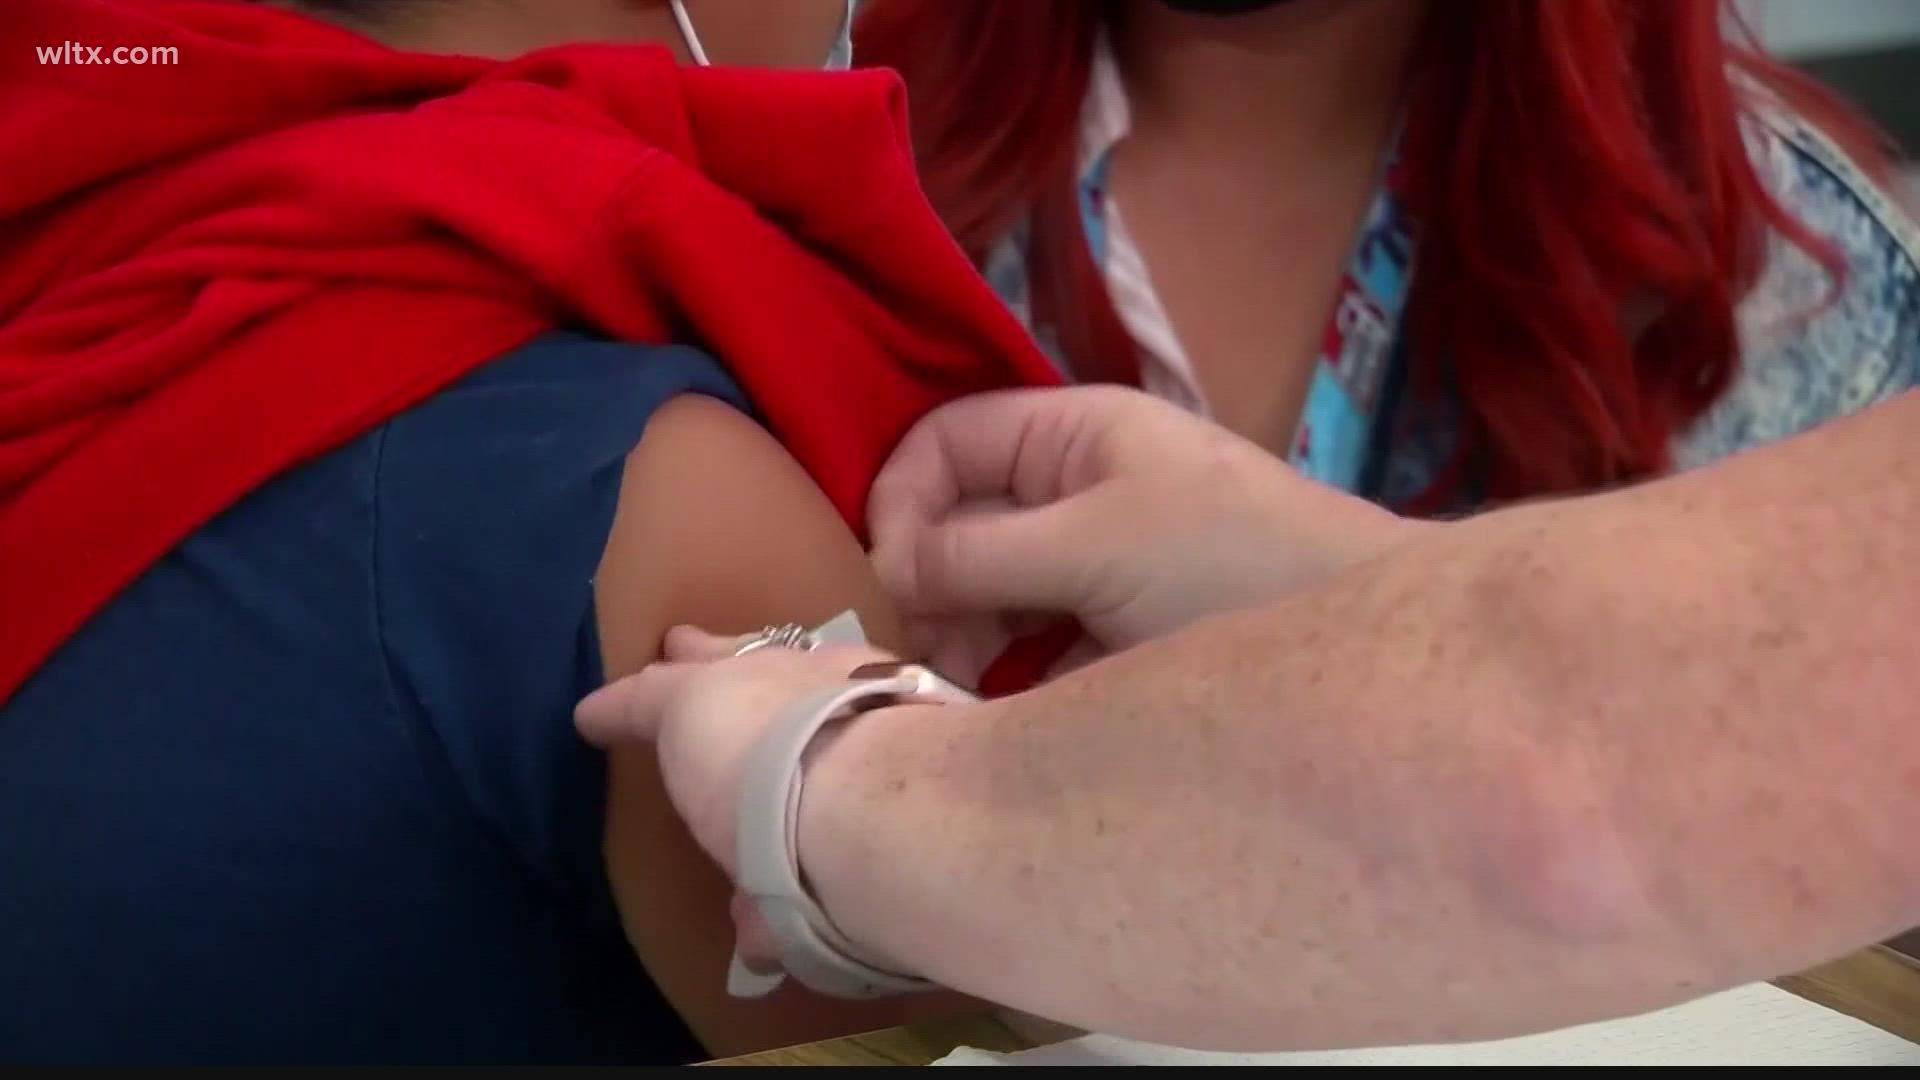 U.S. regulators on Friday authorized the first COVID-19 shots for infants and preschoolers, paving the way for vaccinations to begin next week.